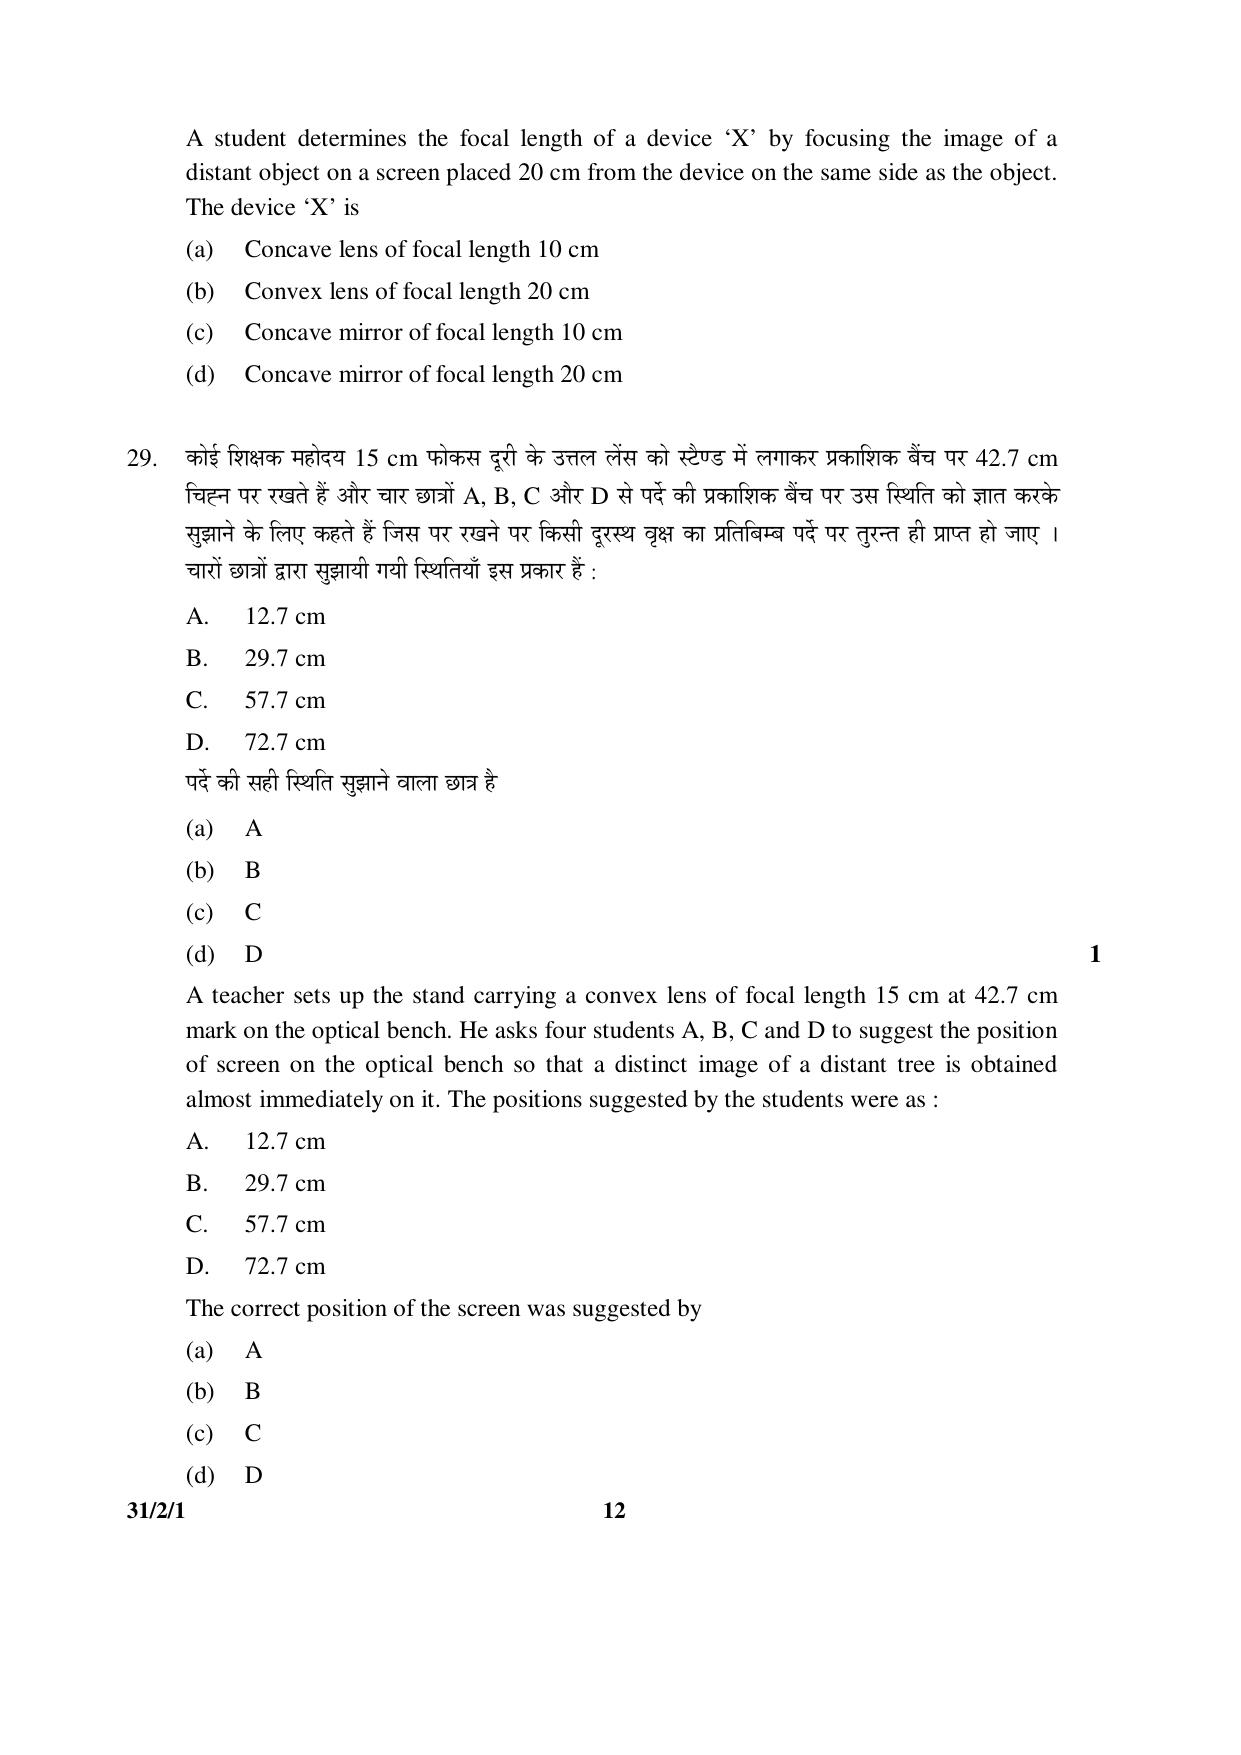 CBSE Class 10 31-2-1 _Science 2016 Question Paper - Page 12